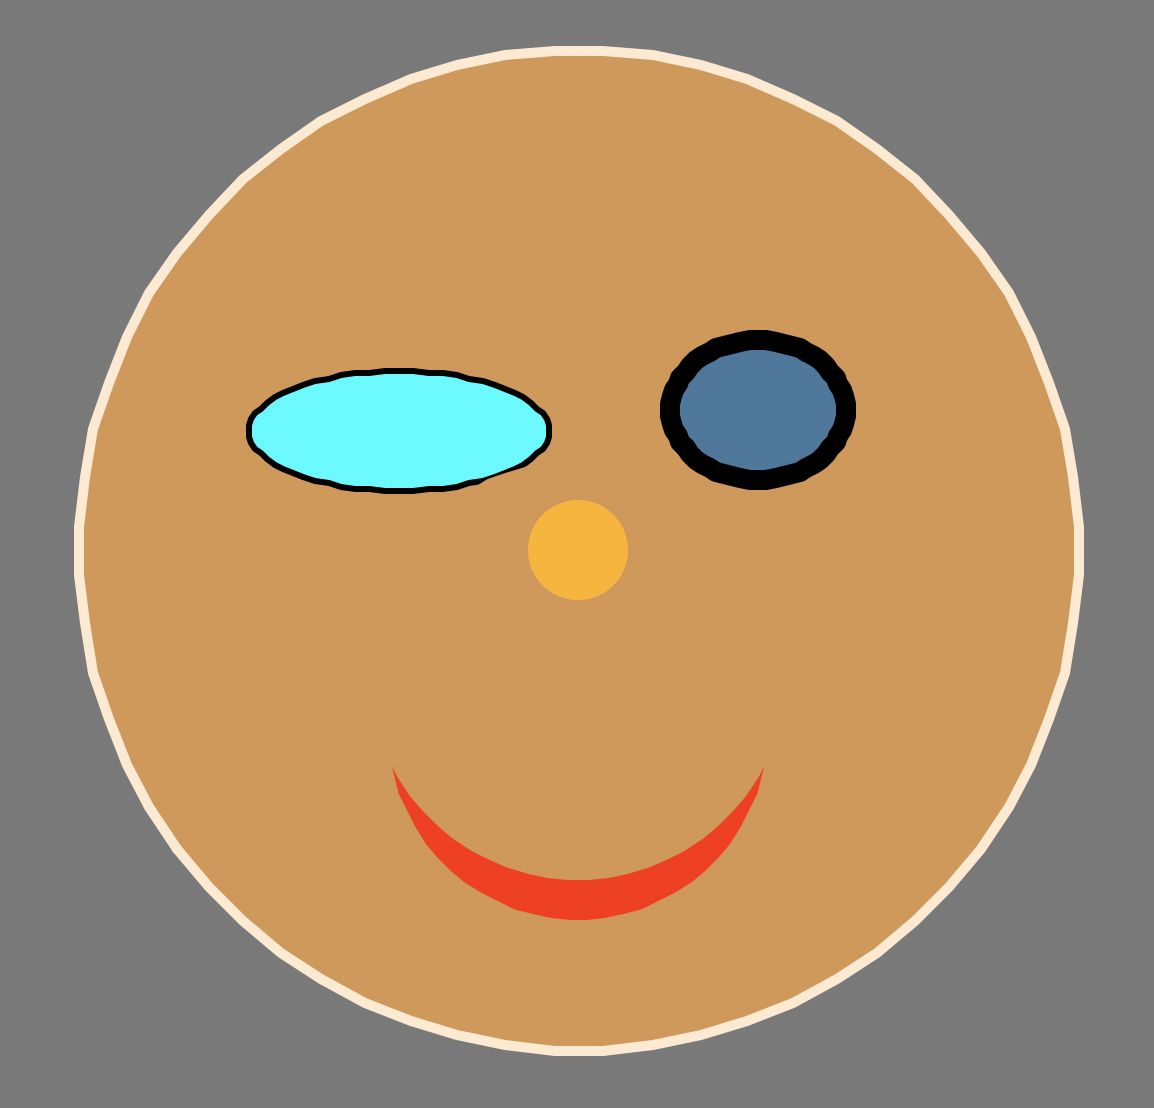 The same brown face with eyes described above, now with the addition of an orange circle in the middle for a nose and a red crescent in the bottom half for a smile.